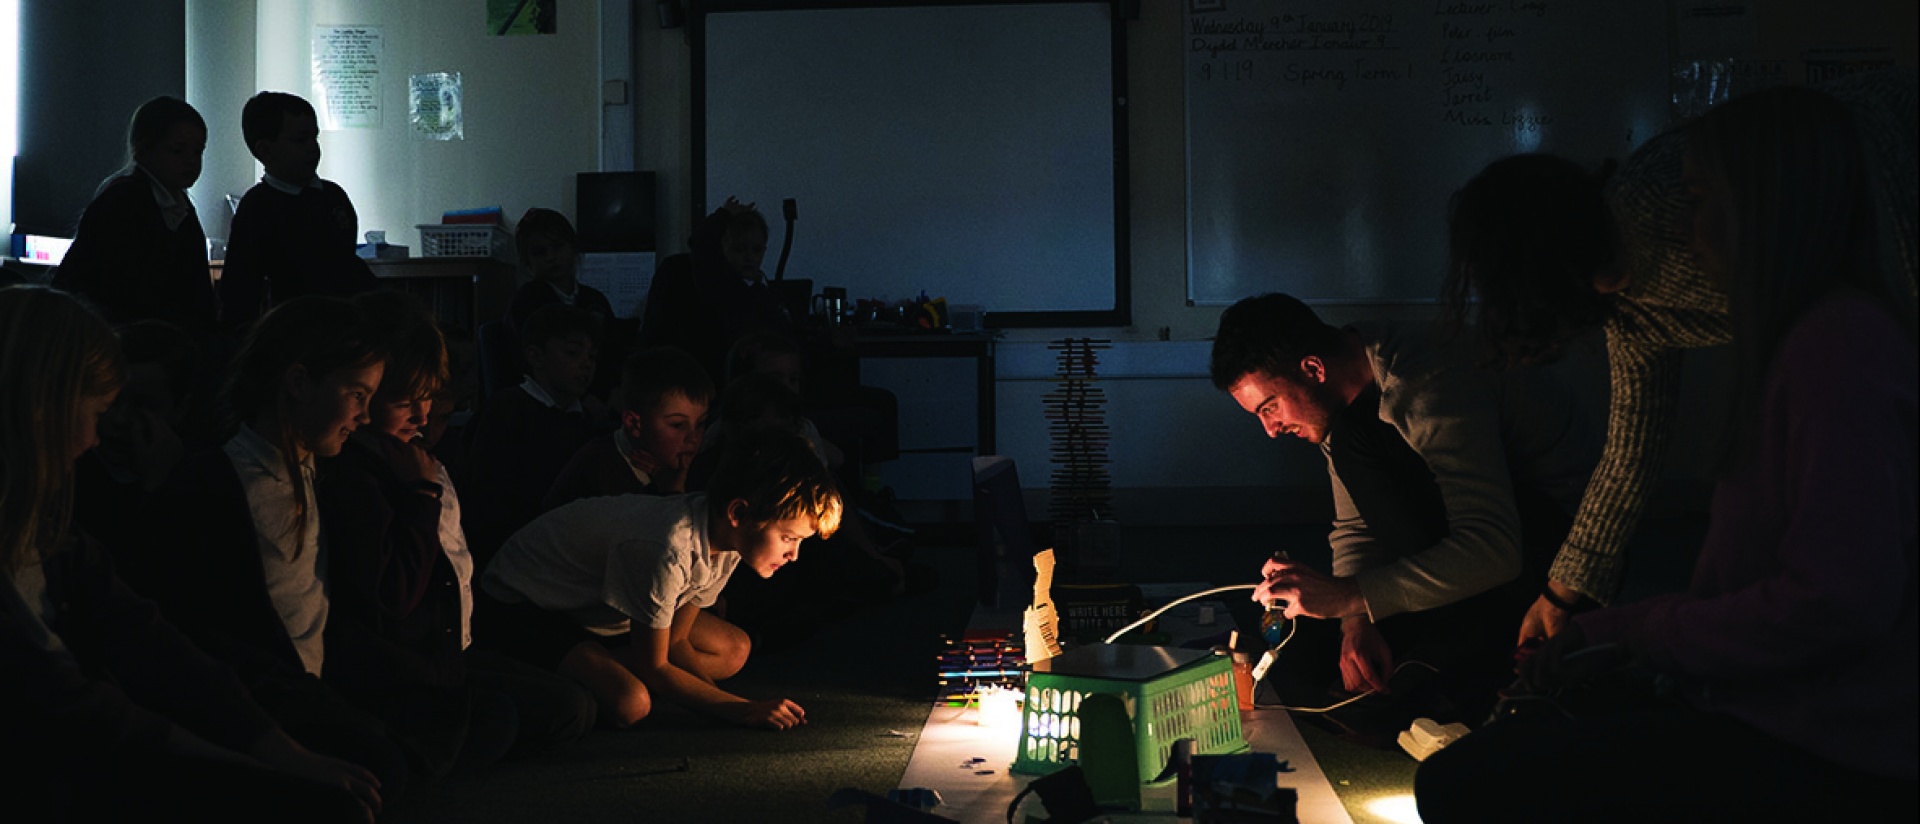 Teacher shows demonstrates a creative project on the floor to a group of children.